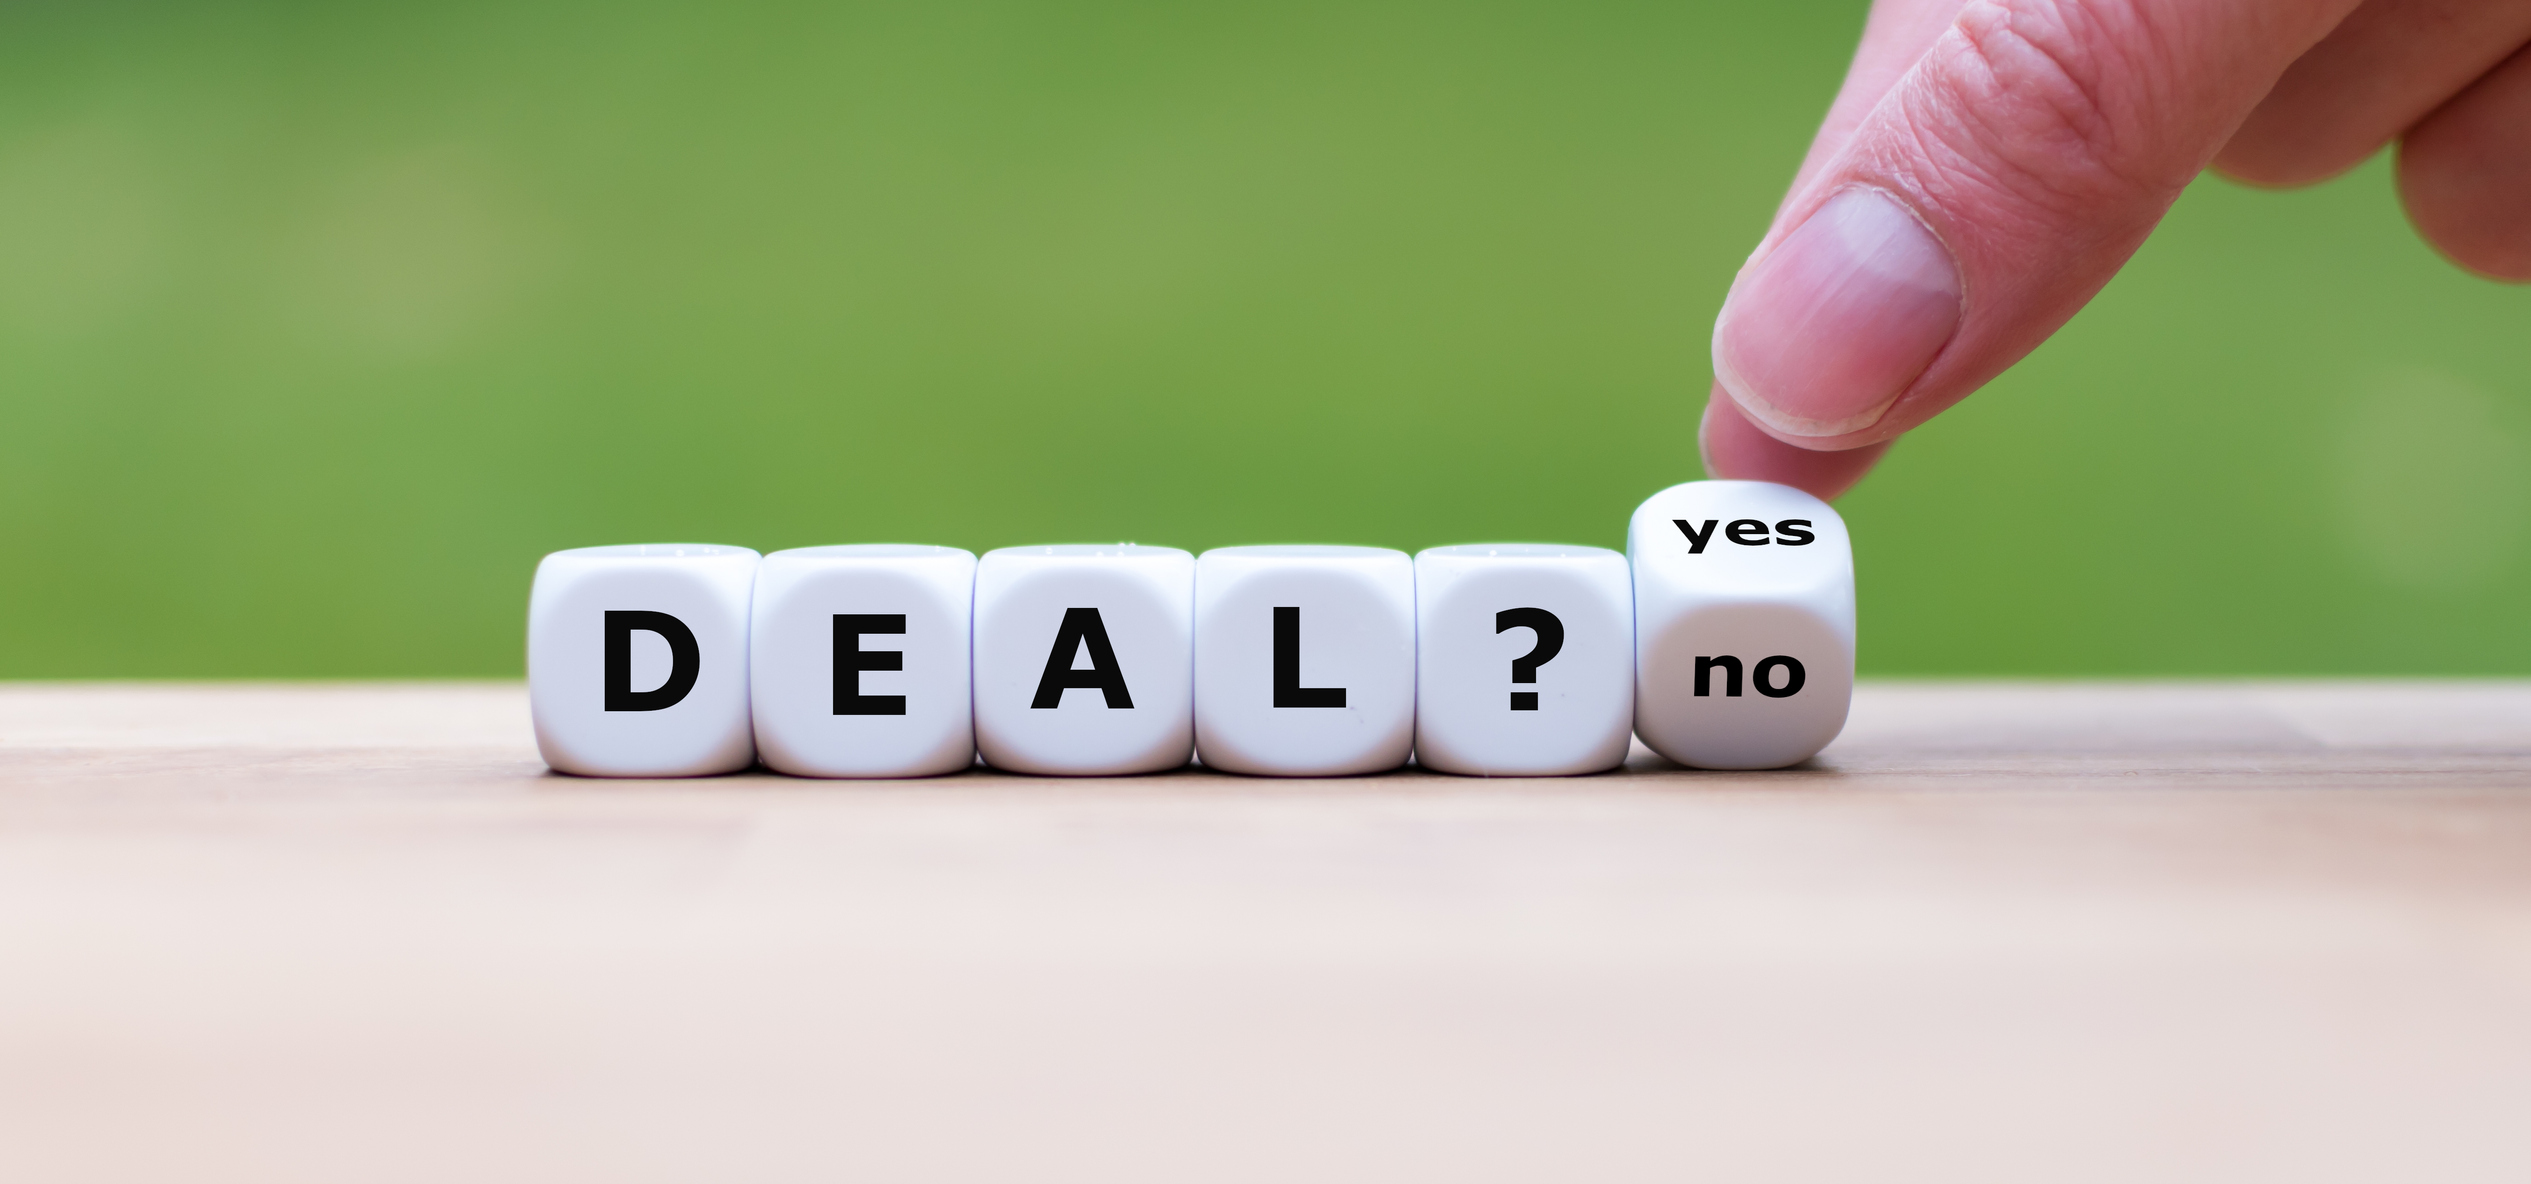 photo of deal spelled out using dice with a final dice teetering between yes or no